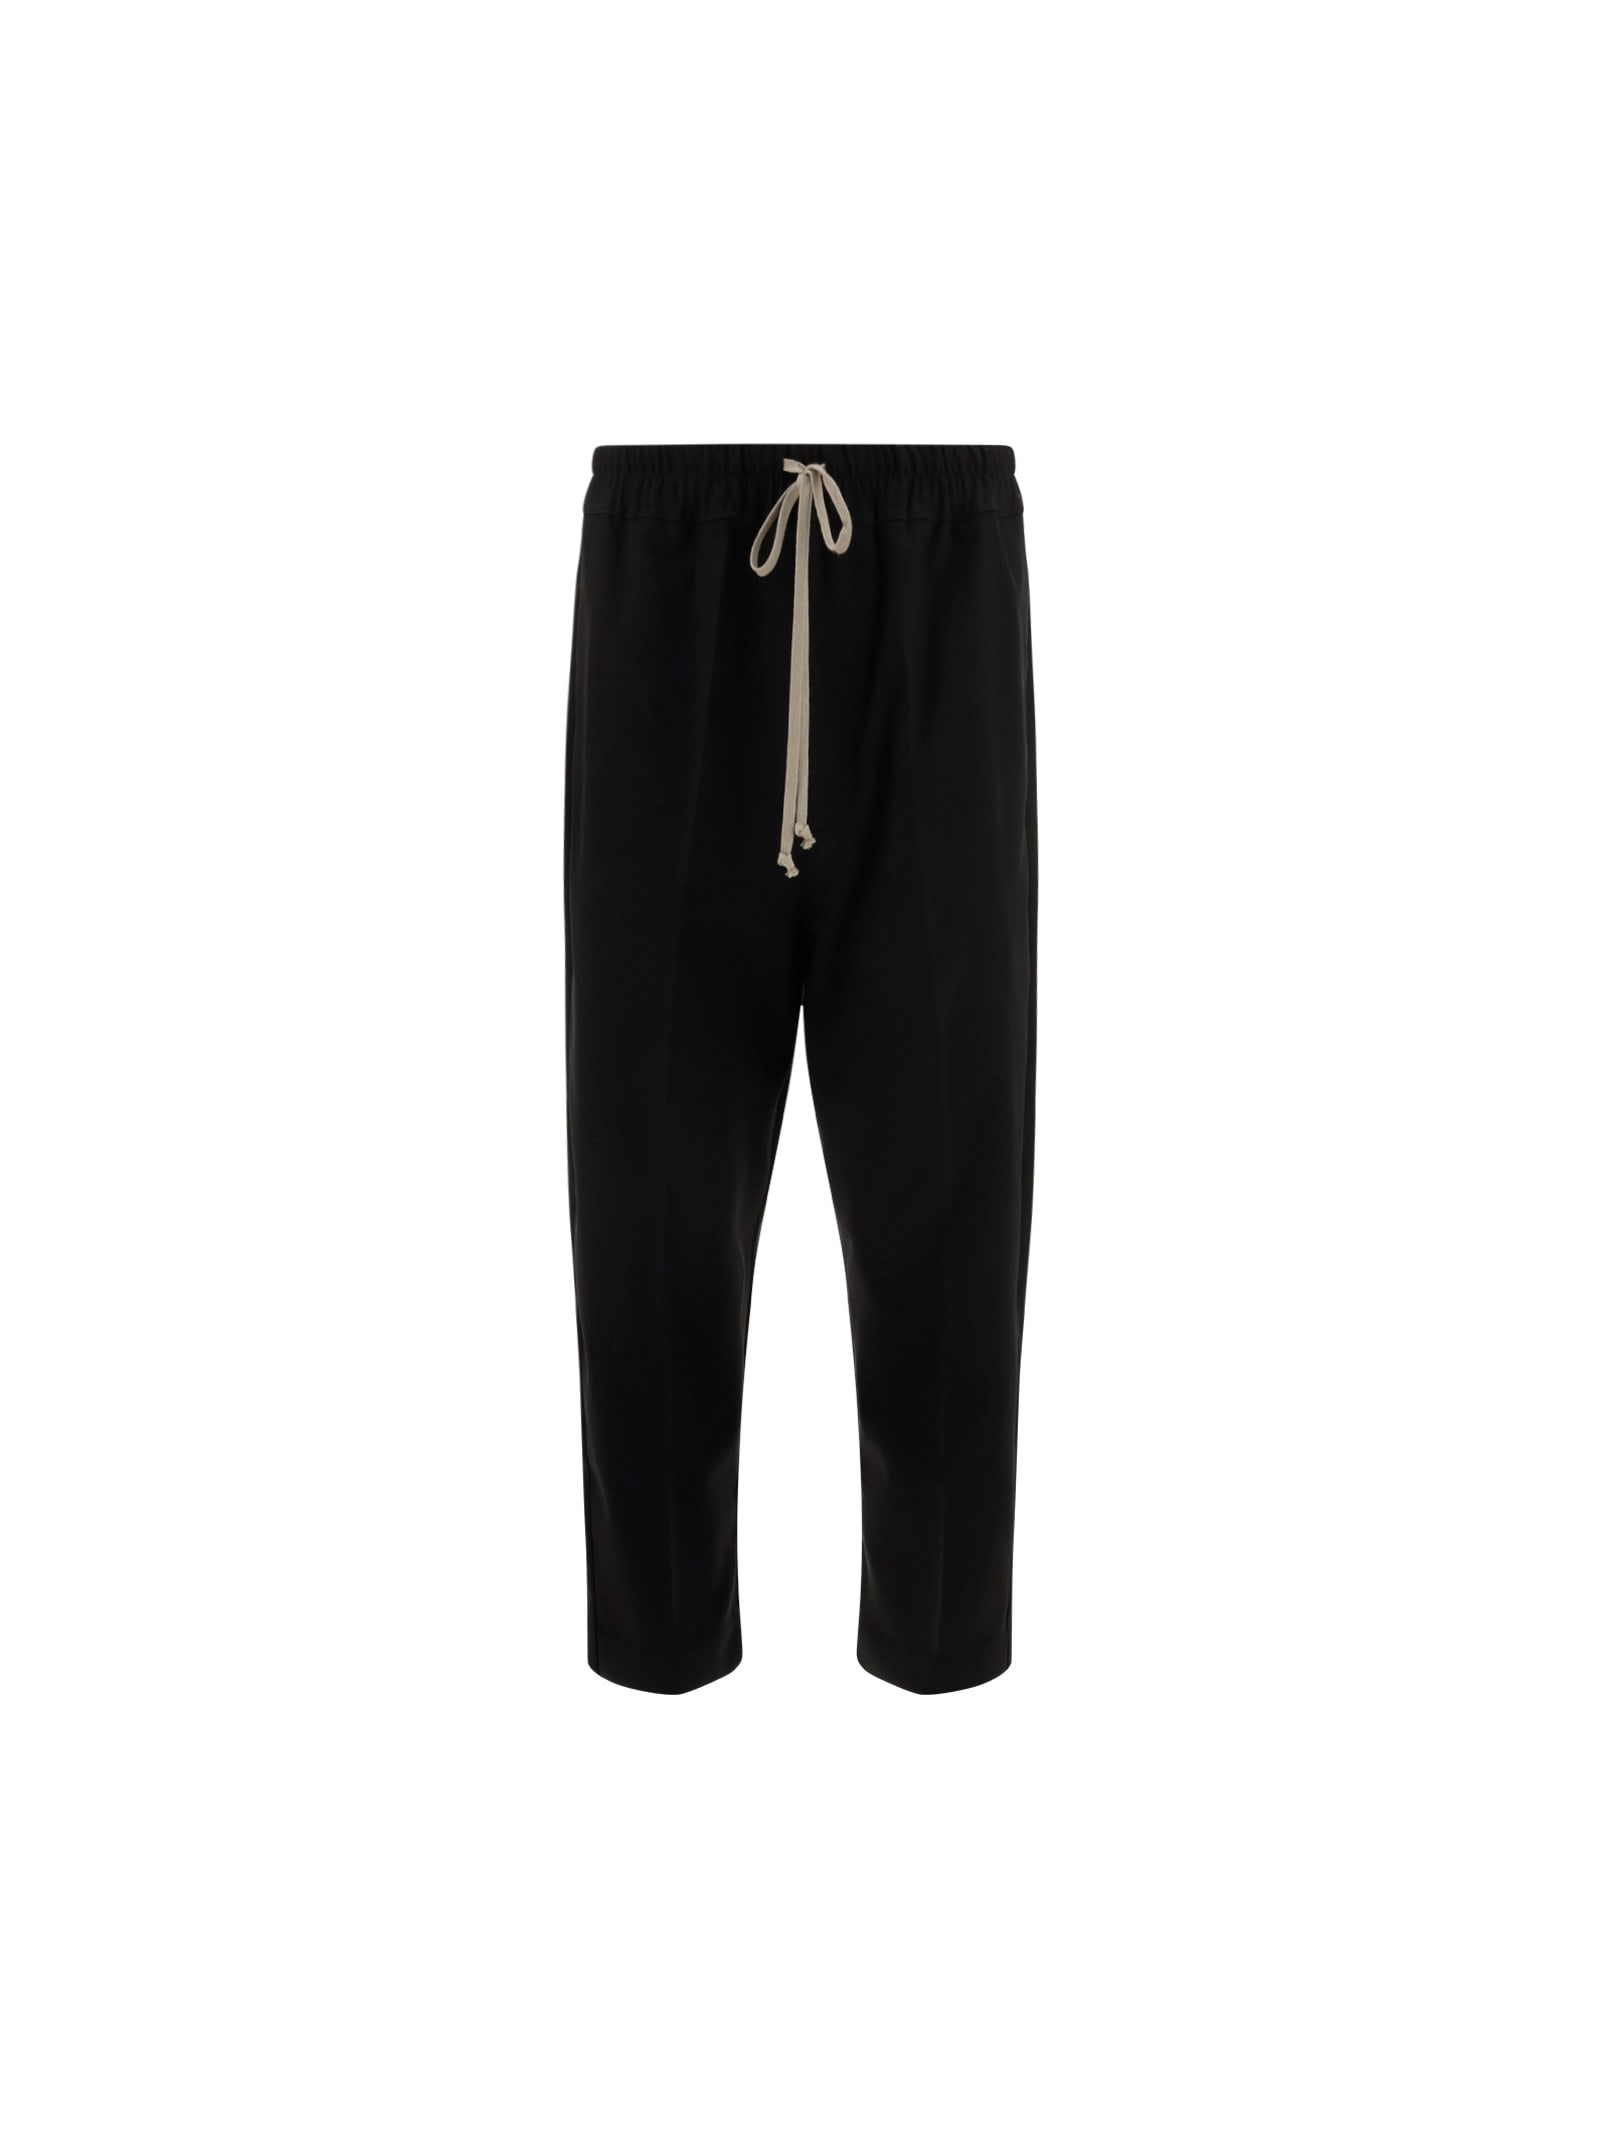 Rick Owens Astaires Pants